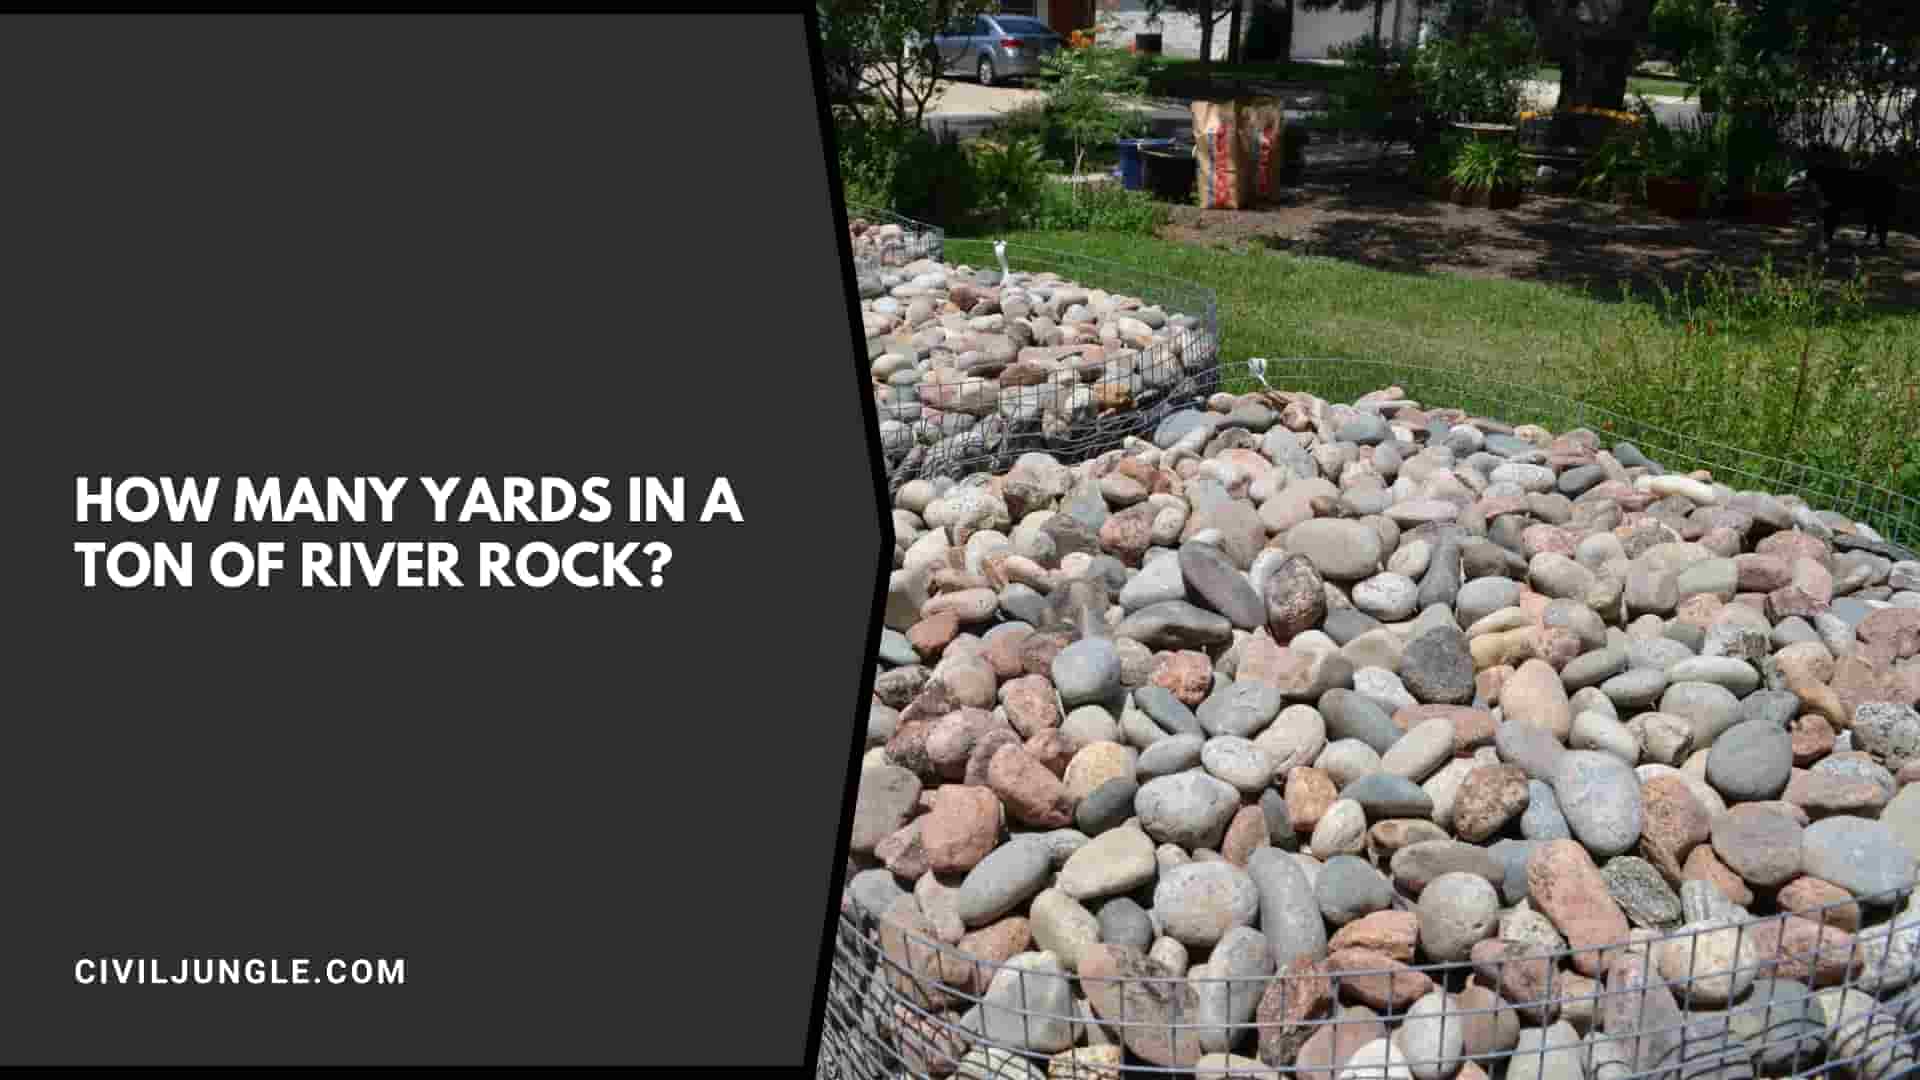 How Many Yards in a Ton of River Rock?